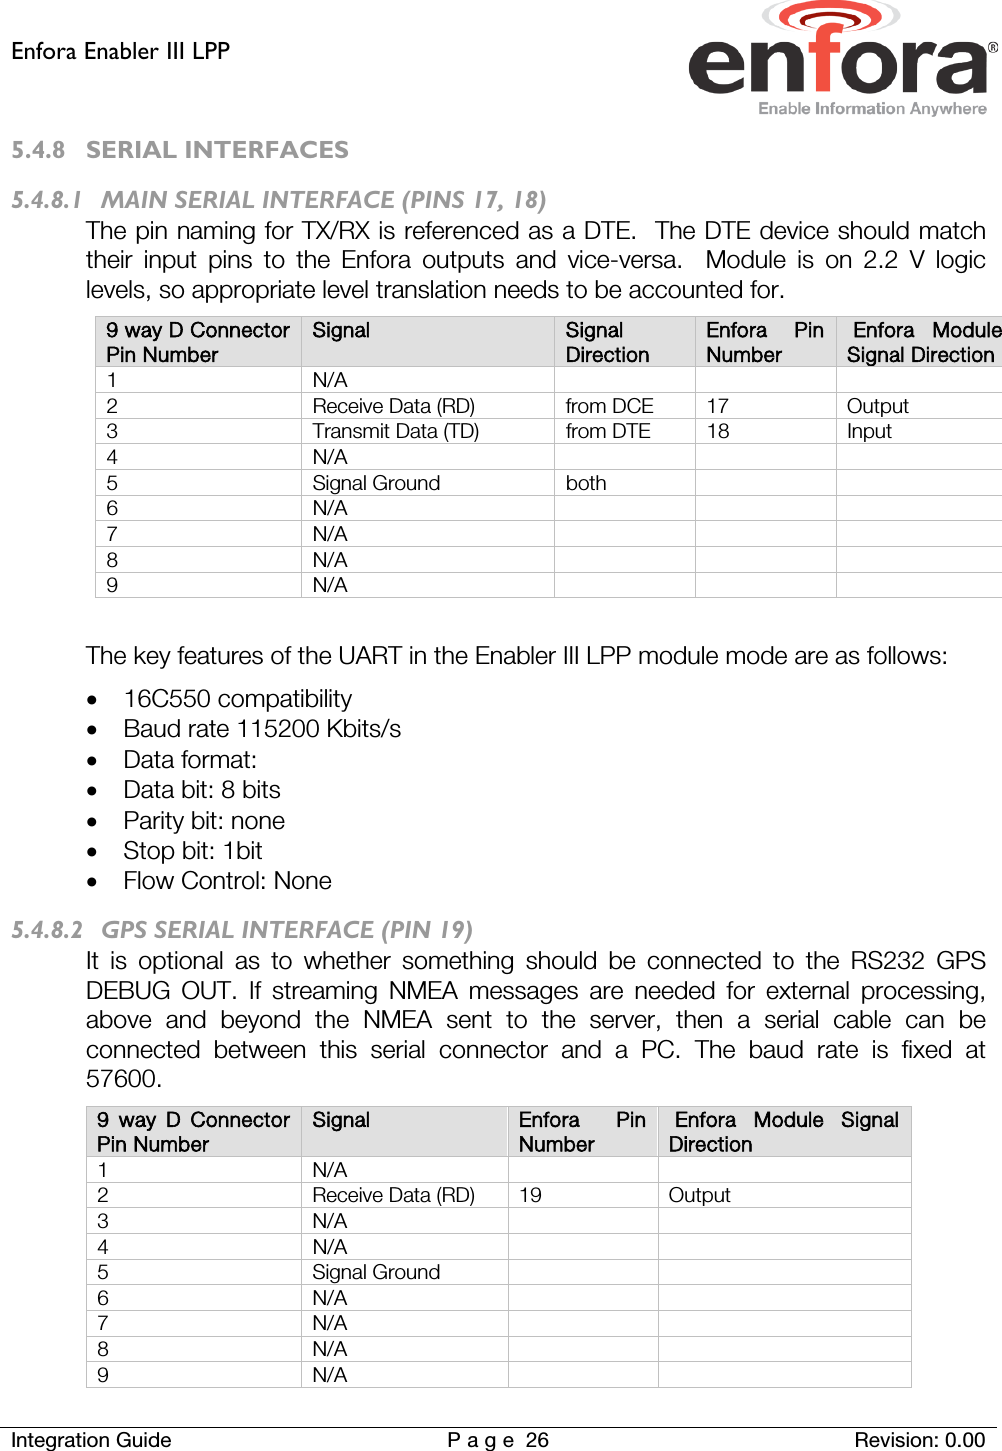 Enfora Enabler III LPP    Integration Guide Page 26 Revision: 0.00  5.4.8 SERIAL INTERFACES 5.4.8.1 MAIN SERIAL INTERFACE (PINS 17, 18) The pin naming for TX/RX is referenced as a DTE.  The DTE device should match their input pins to the Enfora outputs and vice-versa.  Module is on 2.2 V logic levels, so appropriate level translation needs to be accounted for.   9 way D Connector Pin Number Signal Signal Direction Enfora Pin Number  Enfora Module Signal Direction 1  N/A       2  Receive Data (RD) from DCE 17 Output 3  Transmit Data (TD) from DTE 18 Input 4  N/A       5  Signal Ground both     6  N/A       7  N/A       8  N/A       9  N/A        The key features of the UART in the Enabler III LPP module mode are as follows: • 16C550 compatibility • Baud rate 115200 Kbits/s • Data format: • Data bit: 8 bits • Parity bit: none • Stop bit: 1bit • Flow Control: None 5.4.8.2 GPS SERIAL INTERFACE (PIN 19) It is optional as to whether something should be connected to the RS232 GPS DEBUG OUT. If streaming NMEA messages are needed for external processing, above and beyond the NMEA sent to the server, then a serial cable can be connected between this serial connector and a PC. The baud rate is fixed at 57600.  9 way D Connector Pin Number Signal Enfora Pin Number  Enfora Module Signal Direction 1  N/A     2  Receive Data (RD) 19 Output 3  N/A     4 N/A   5  Signal Ground     6  N/A     7  N/A     8  N/A     9  N/A     